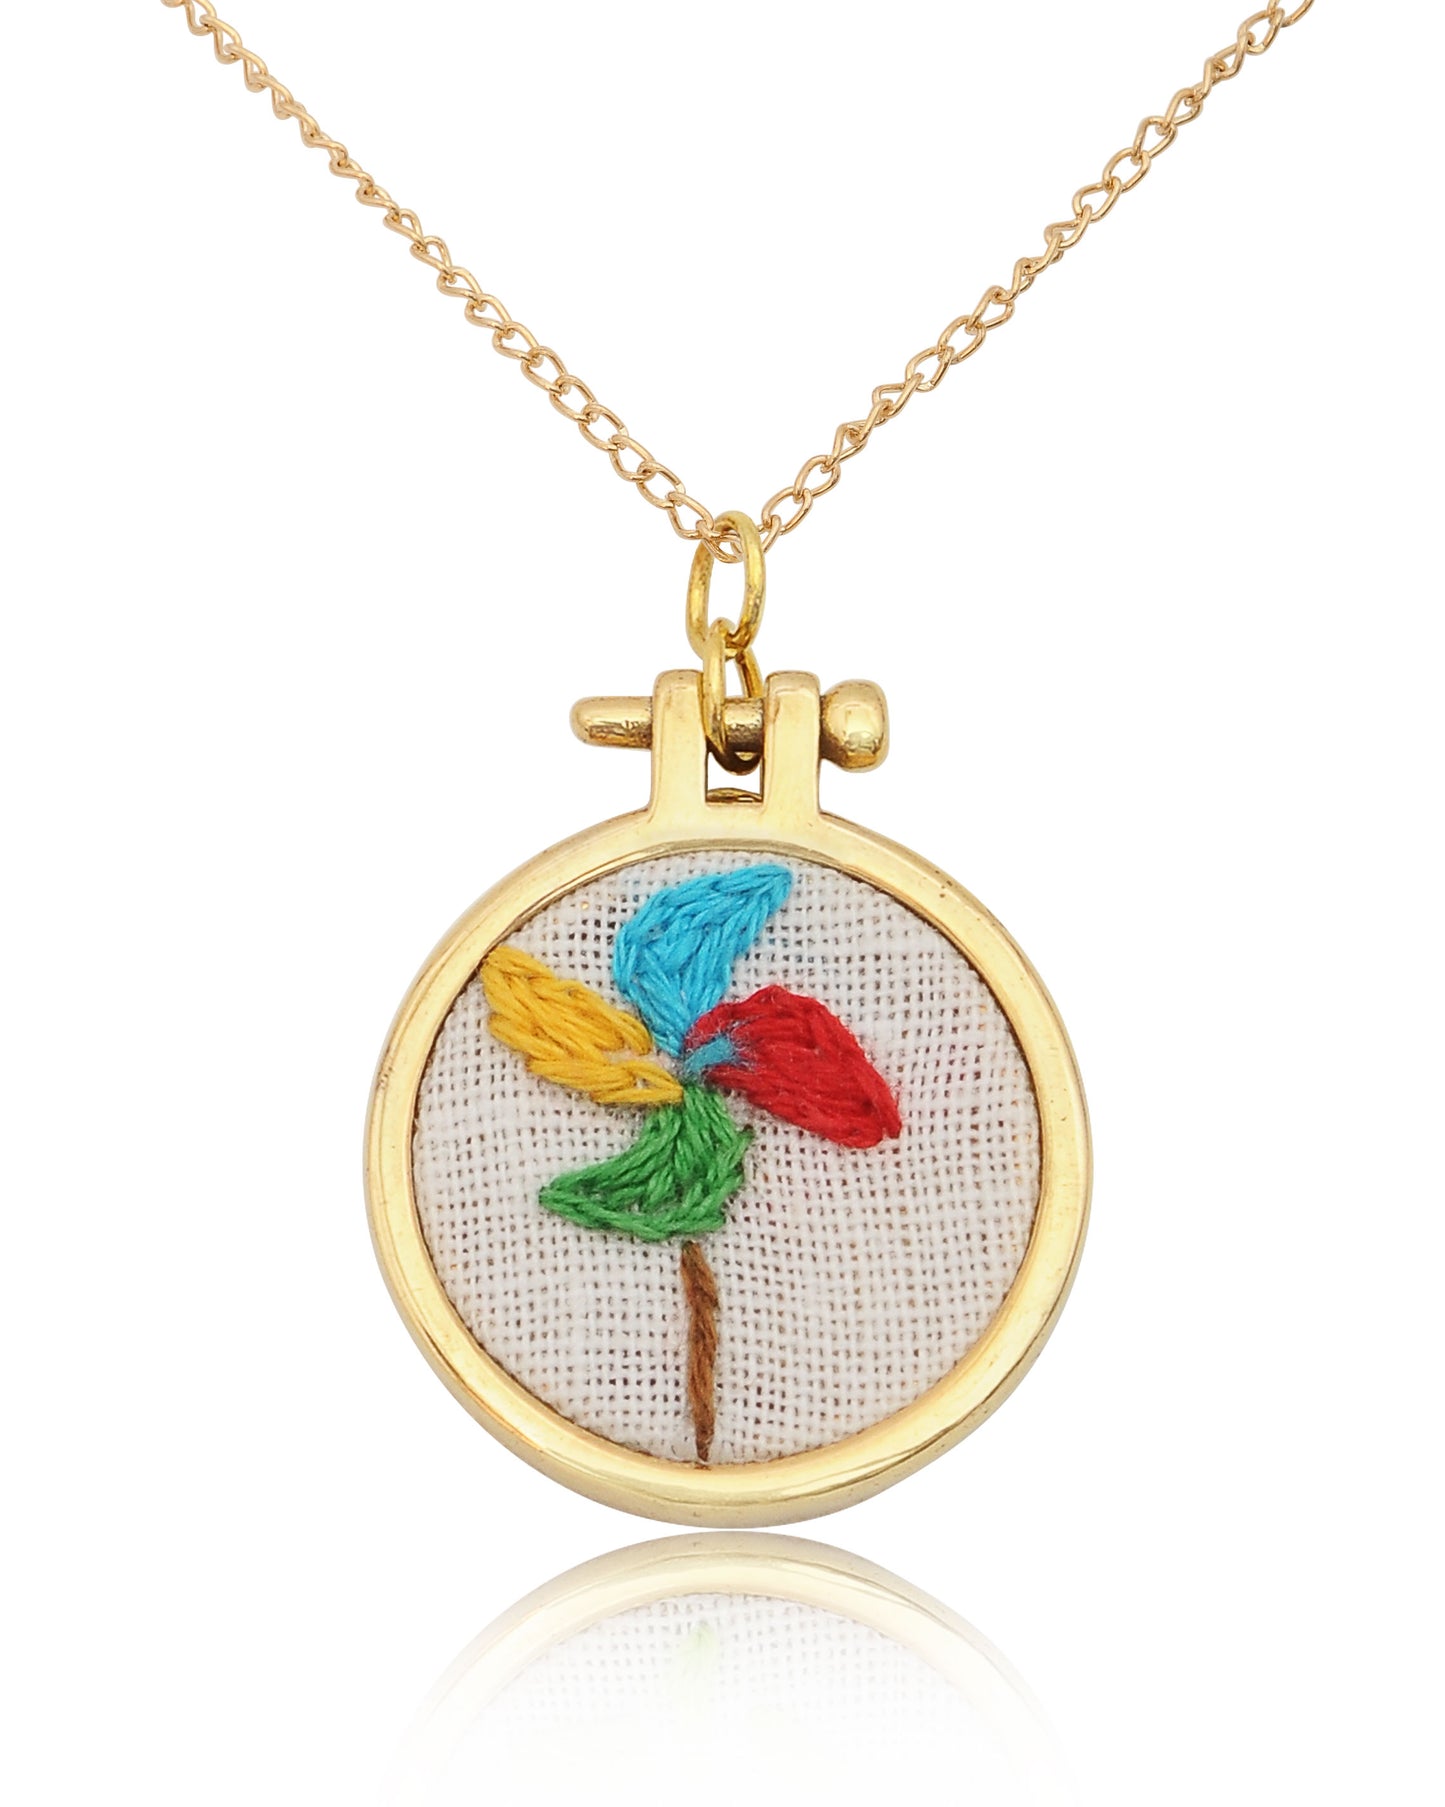 Embroidered Necklace Hand Stitched Statement Jewelry Floral Animal Fruit Pendant